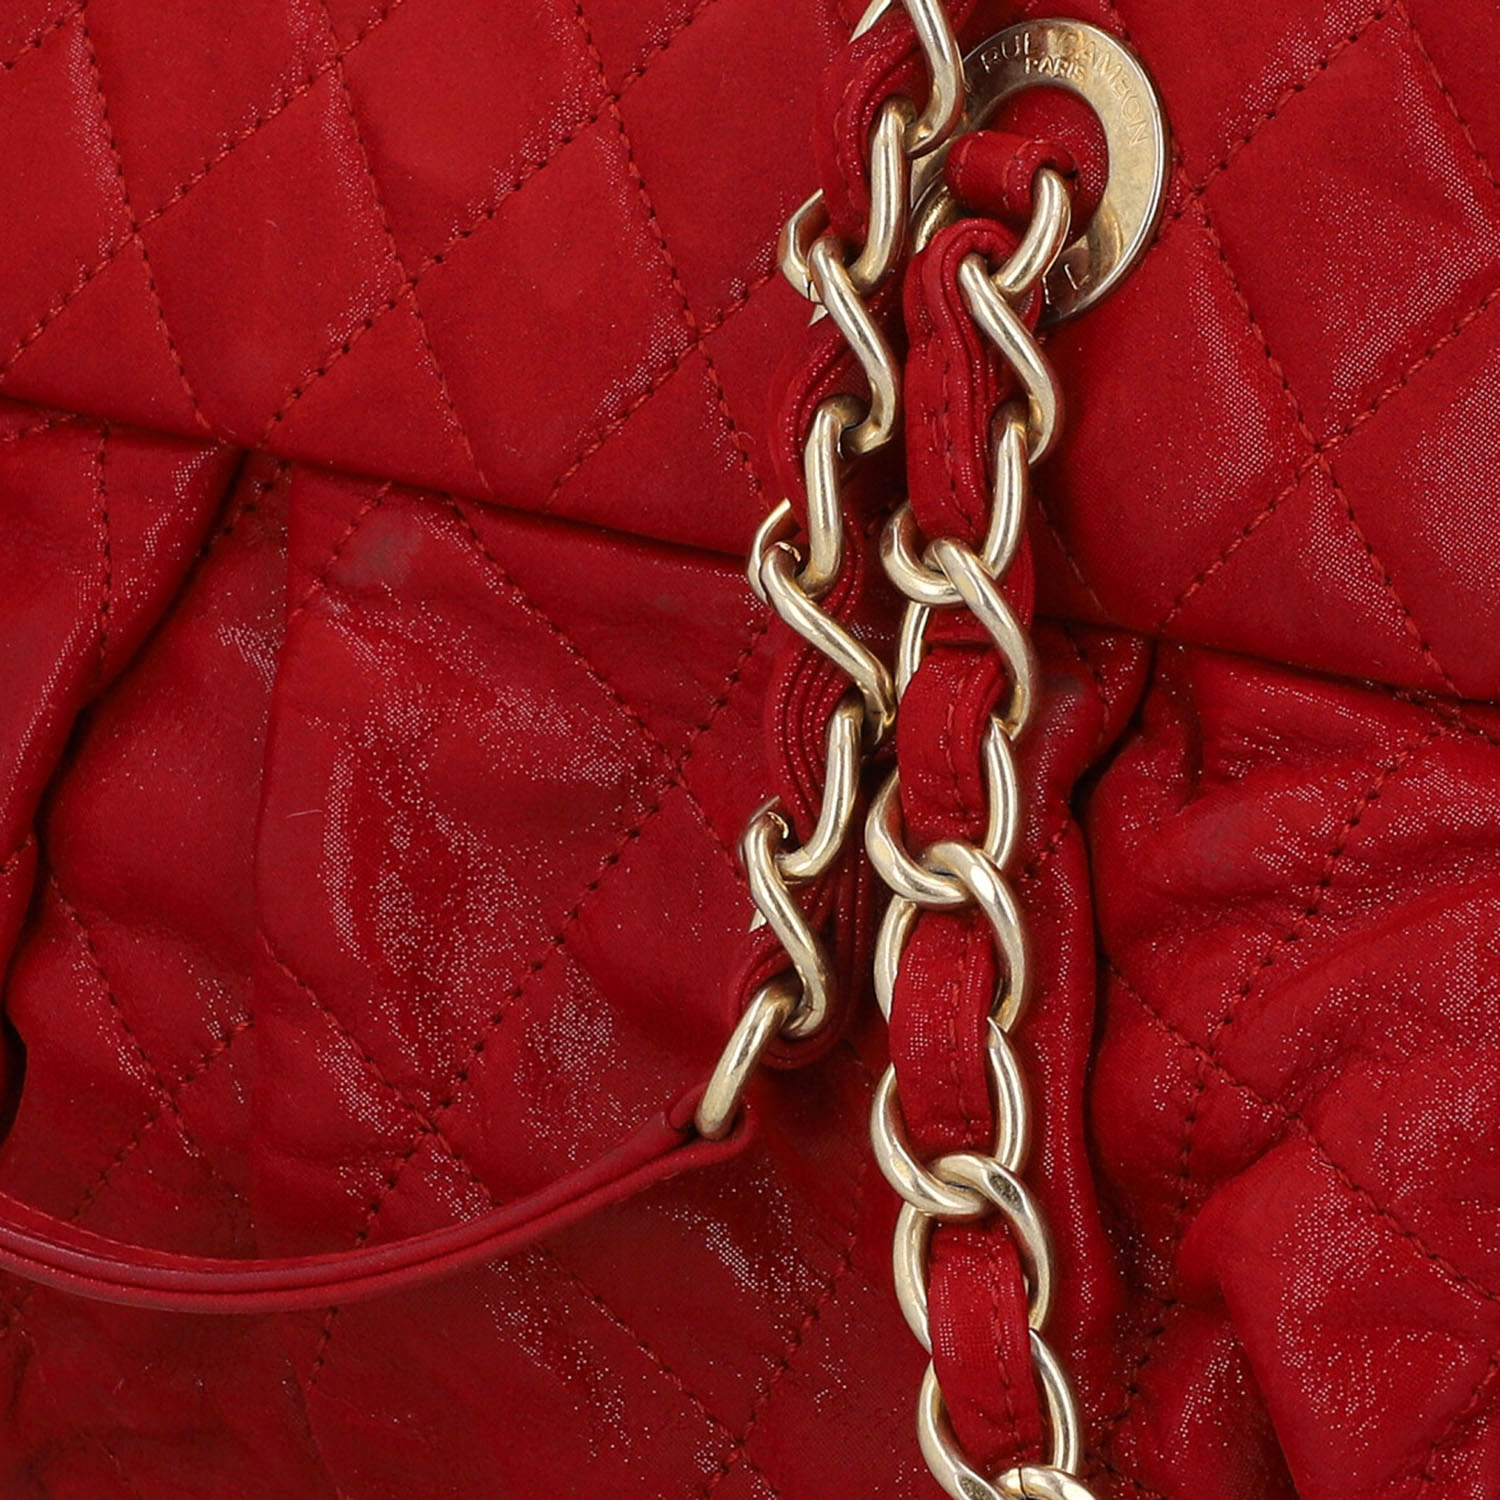 CHANEL Schultertasche, Koll. 2011. - Image 7 of 9